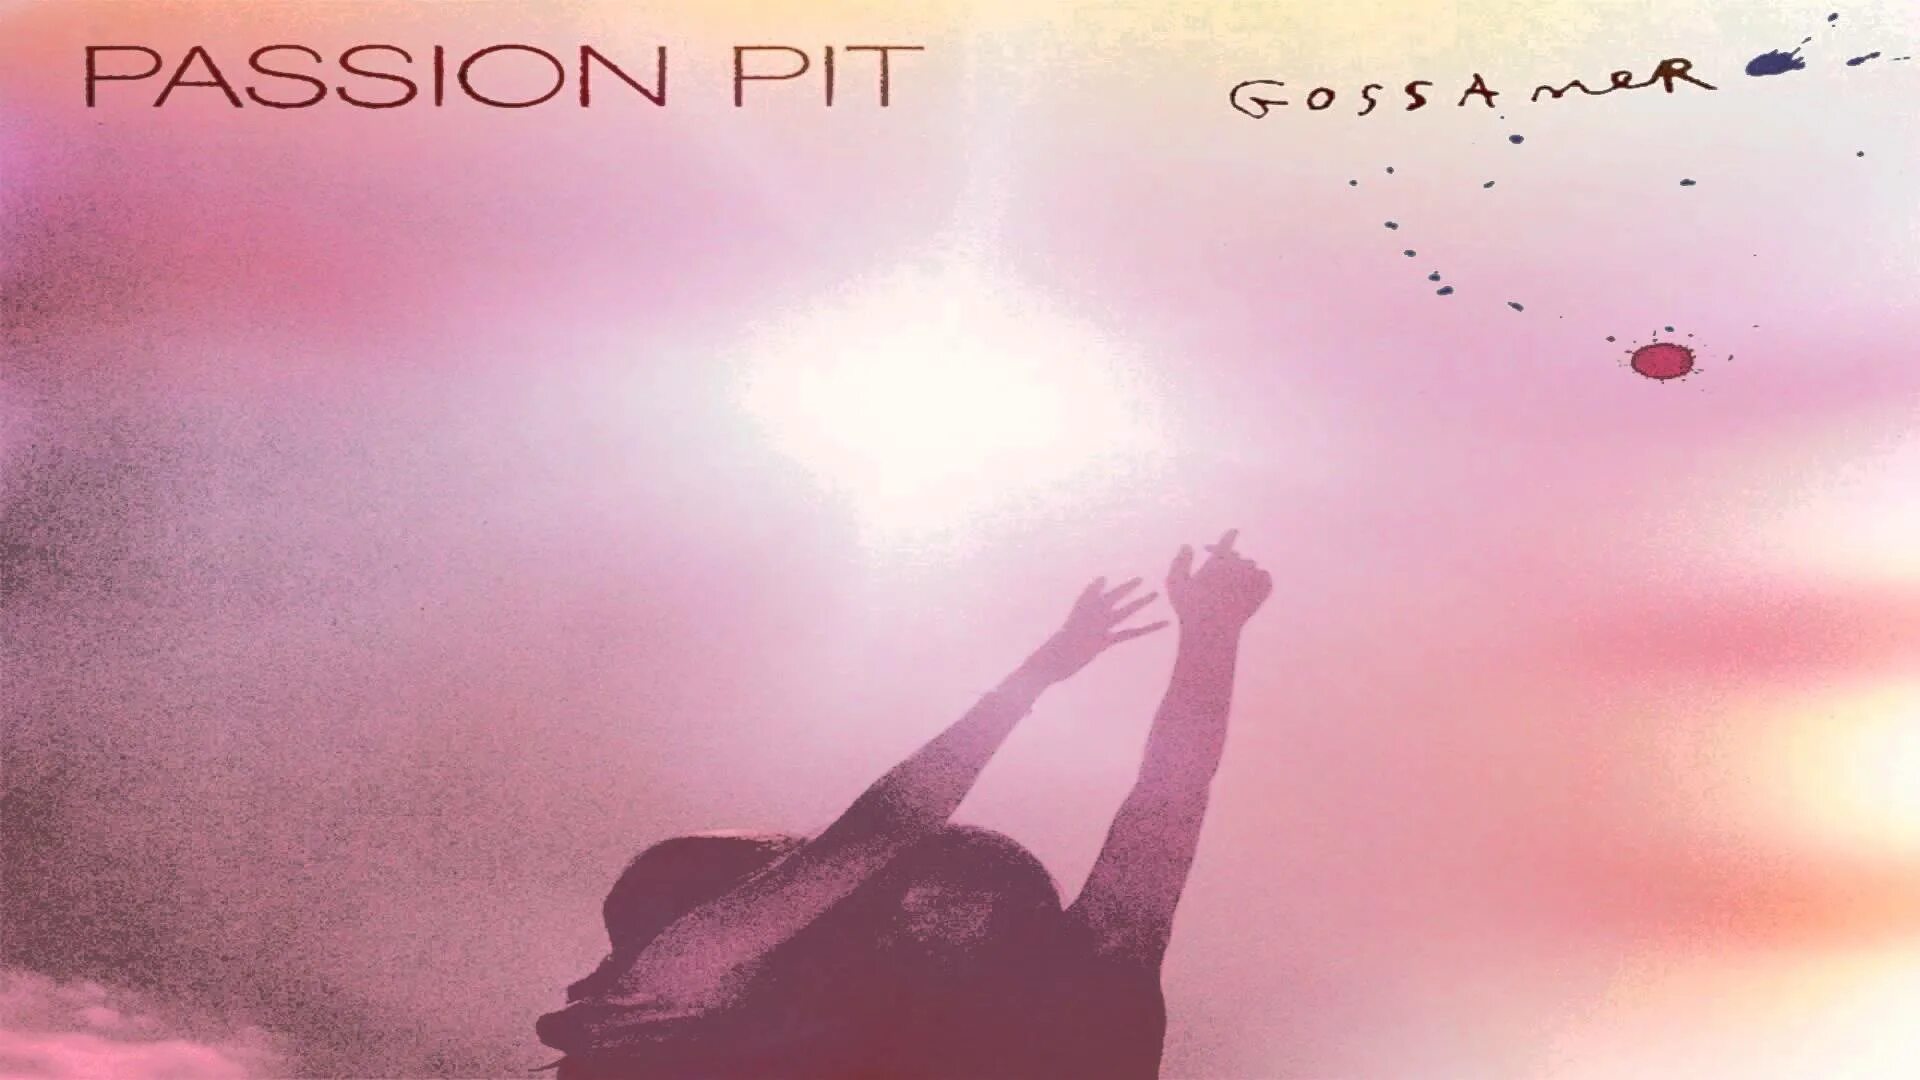 Carried away passion Pit. Gossamer певец. Мем passion Pit - carried away. Passion pit